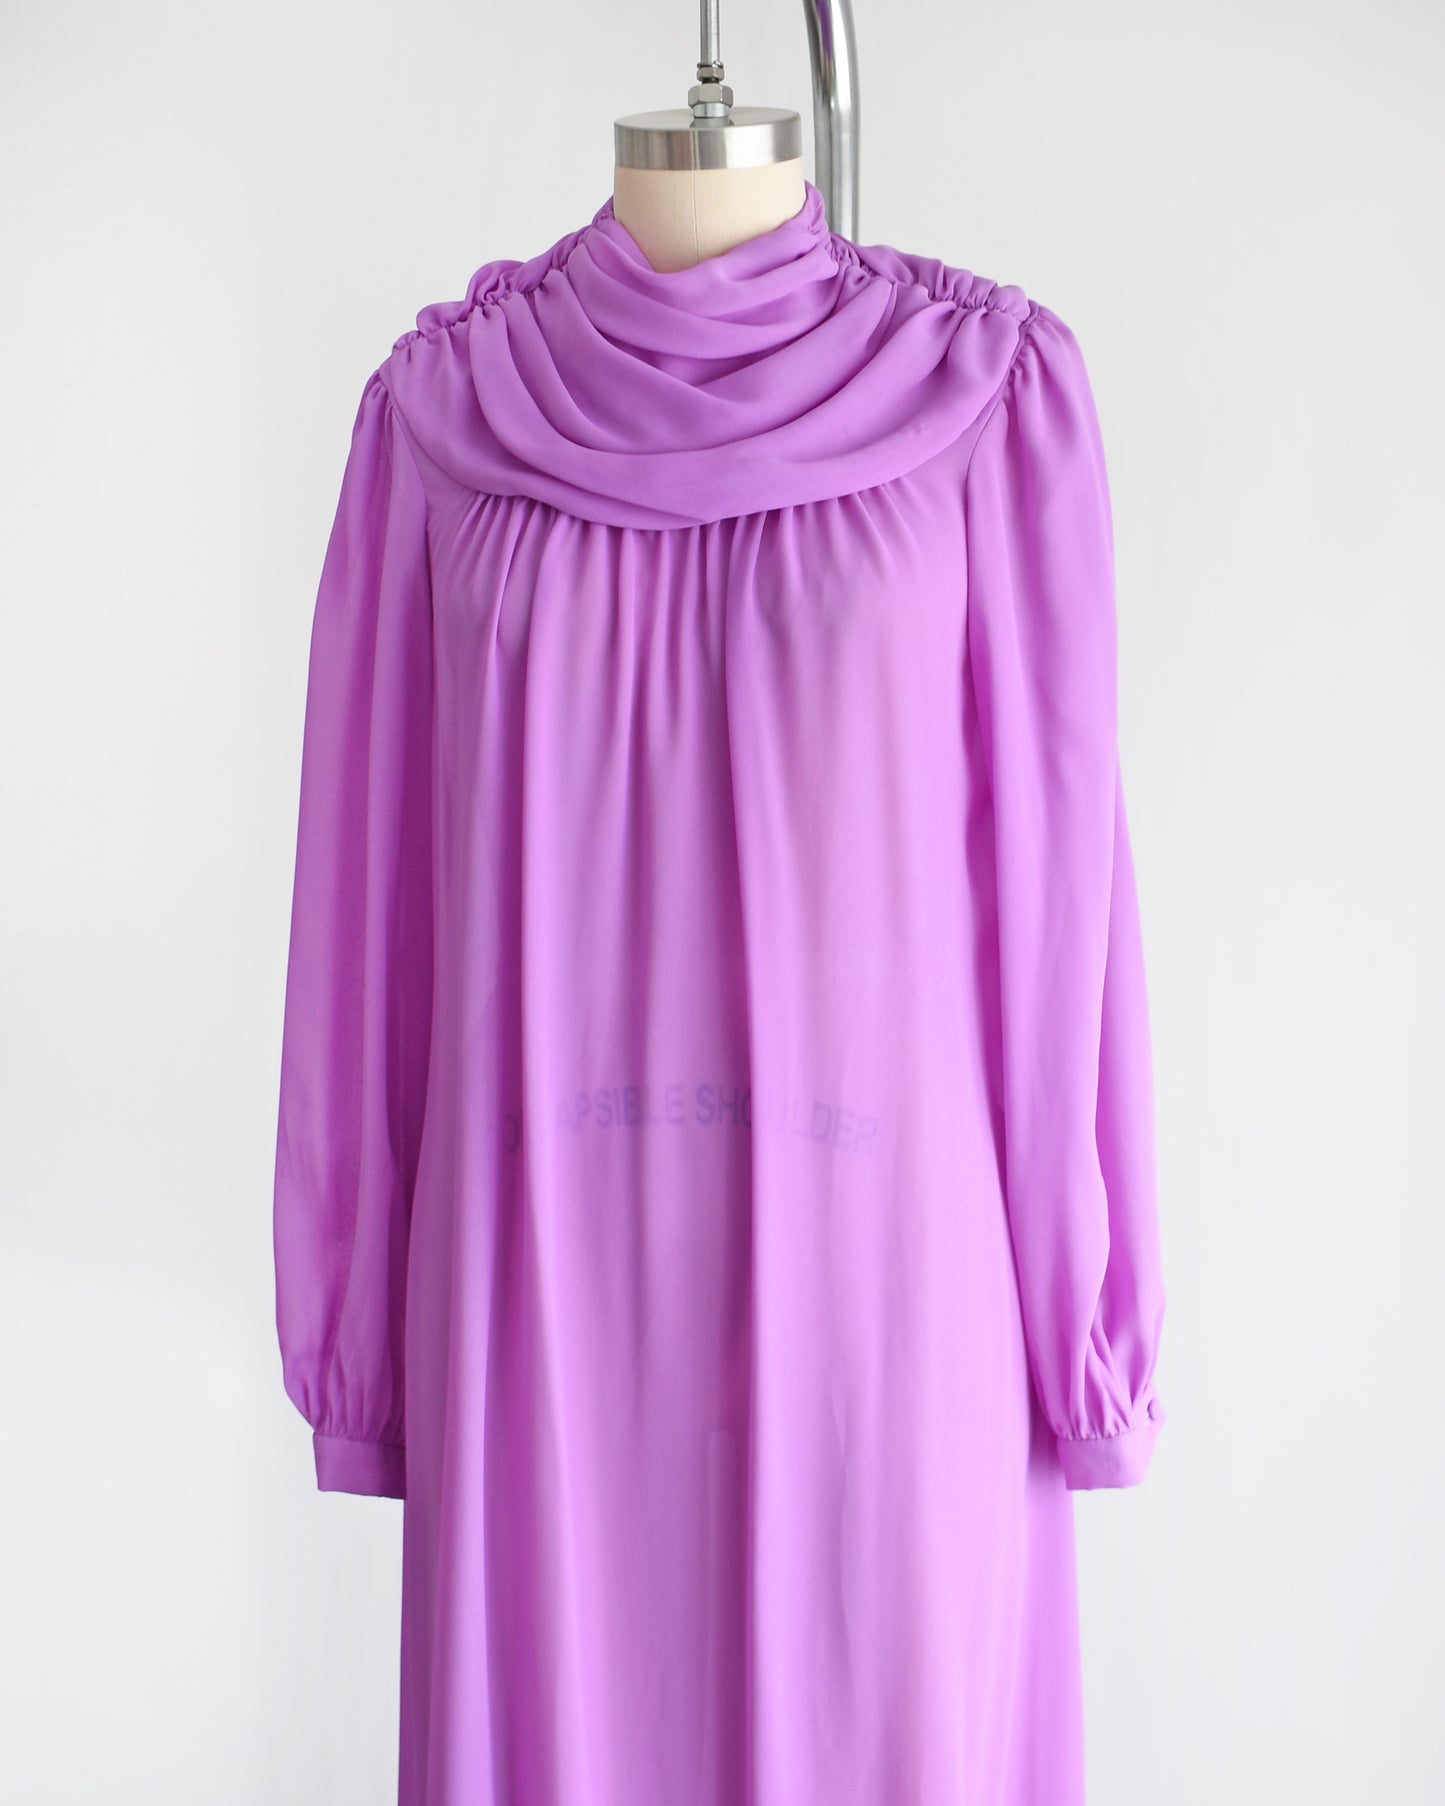 side front view of a vintage 1970s purple semi sheer maxi dress by Joy Stevens California that has a draped neckline and long sleeves